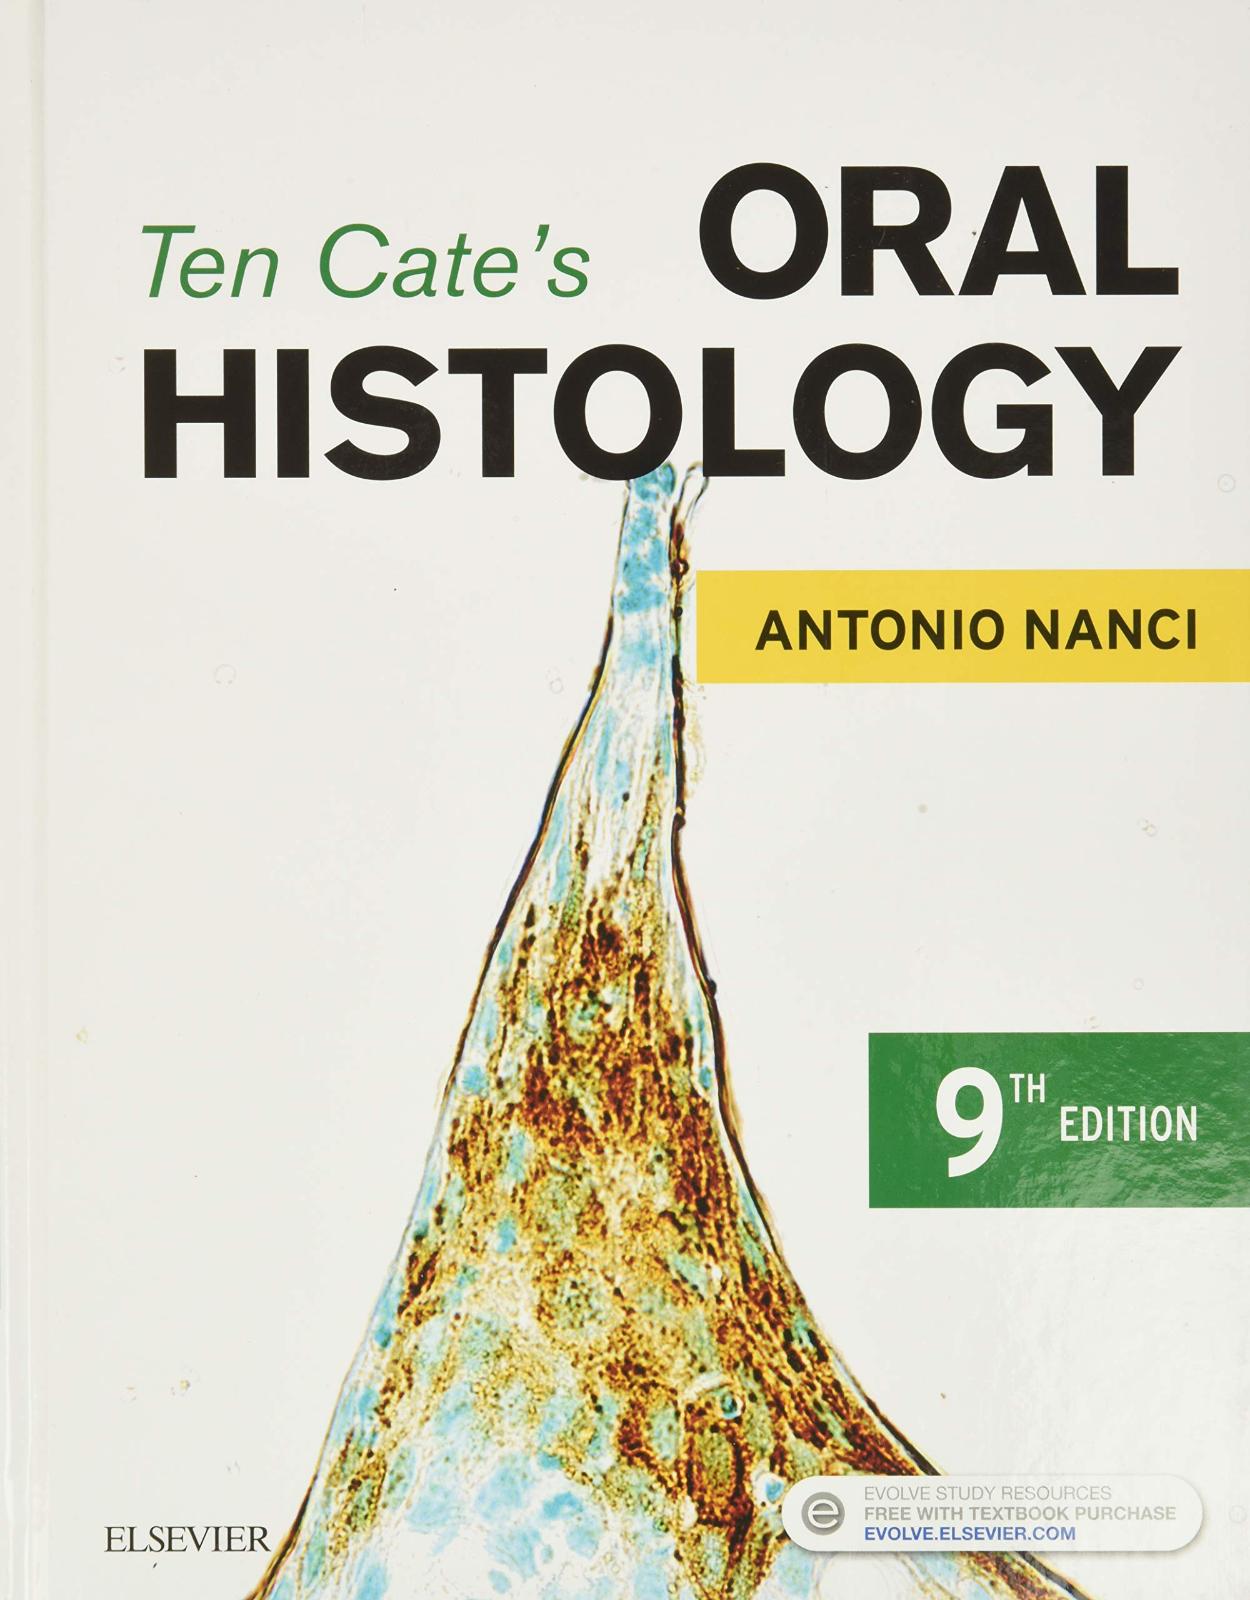 Ten Cate's Oral Histology: Development, Structure, and Function, 9e